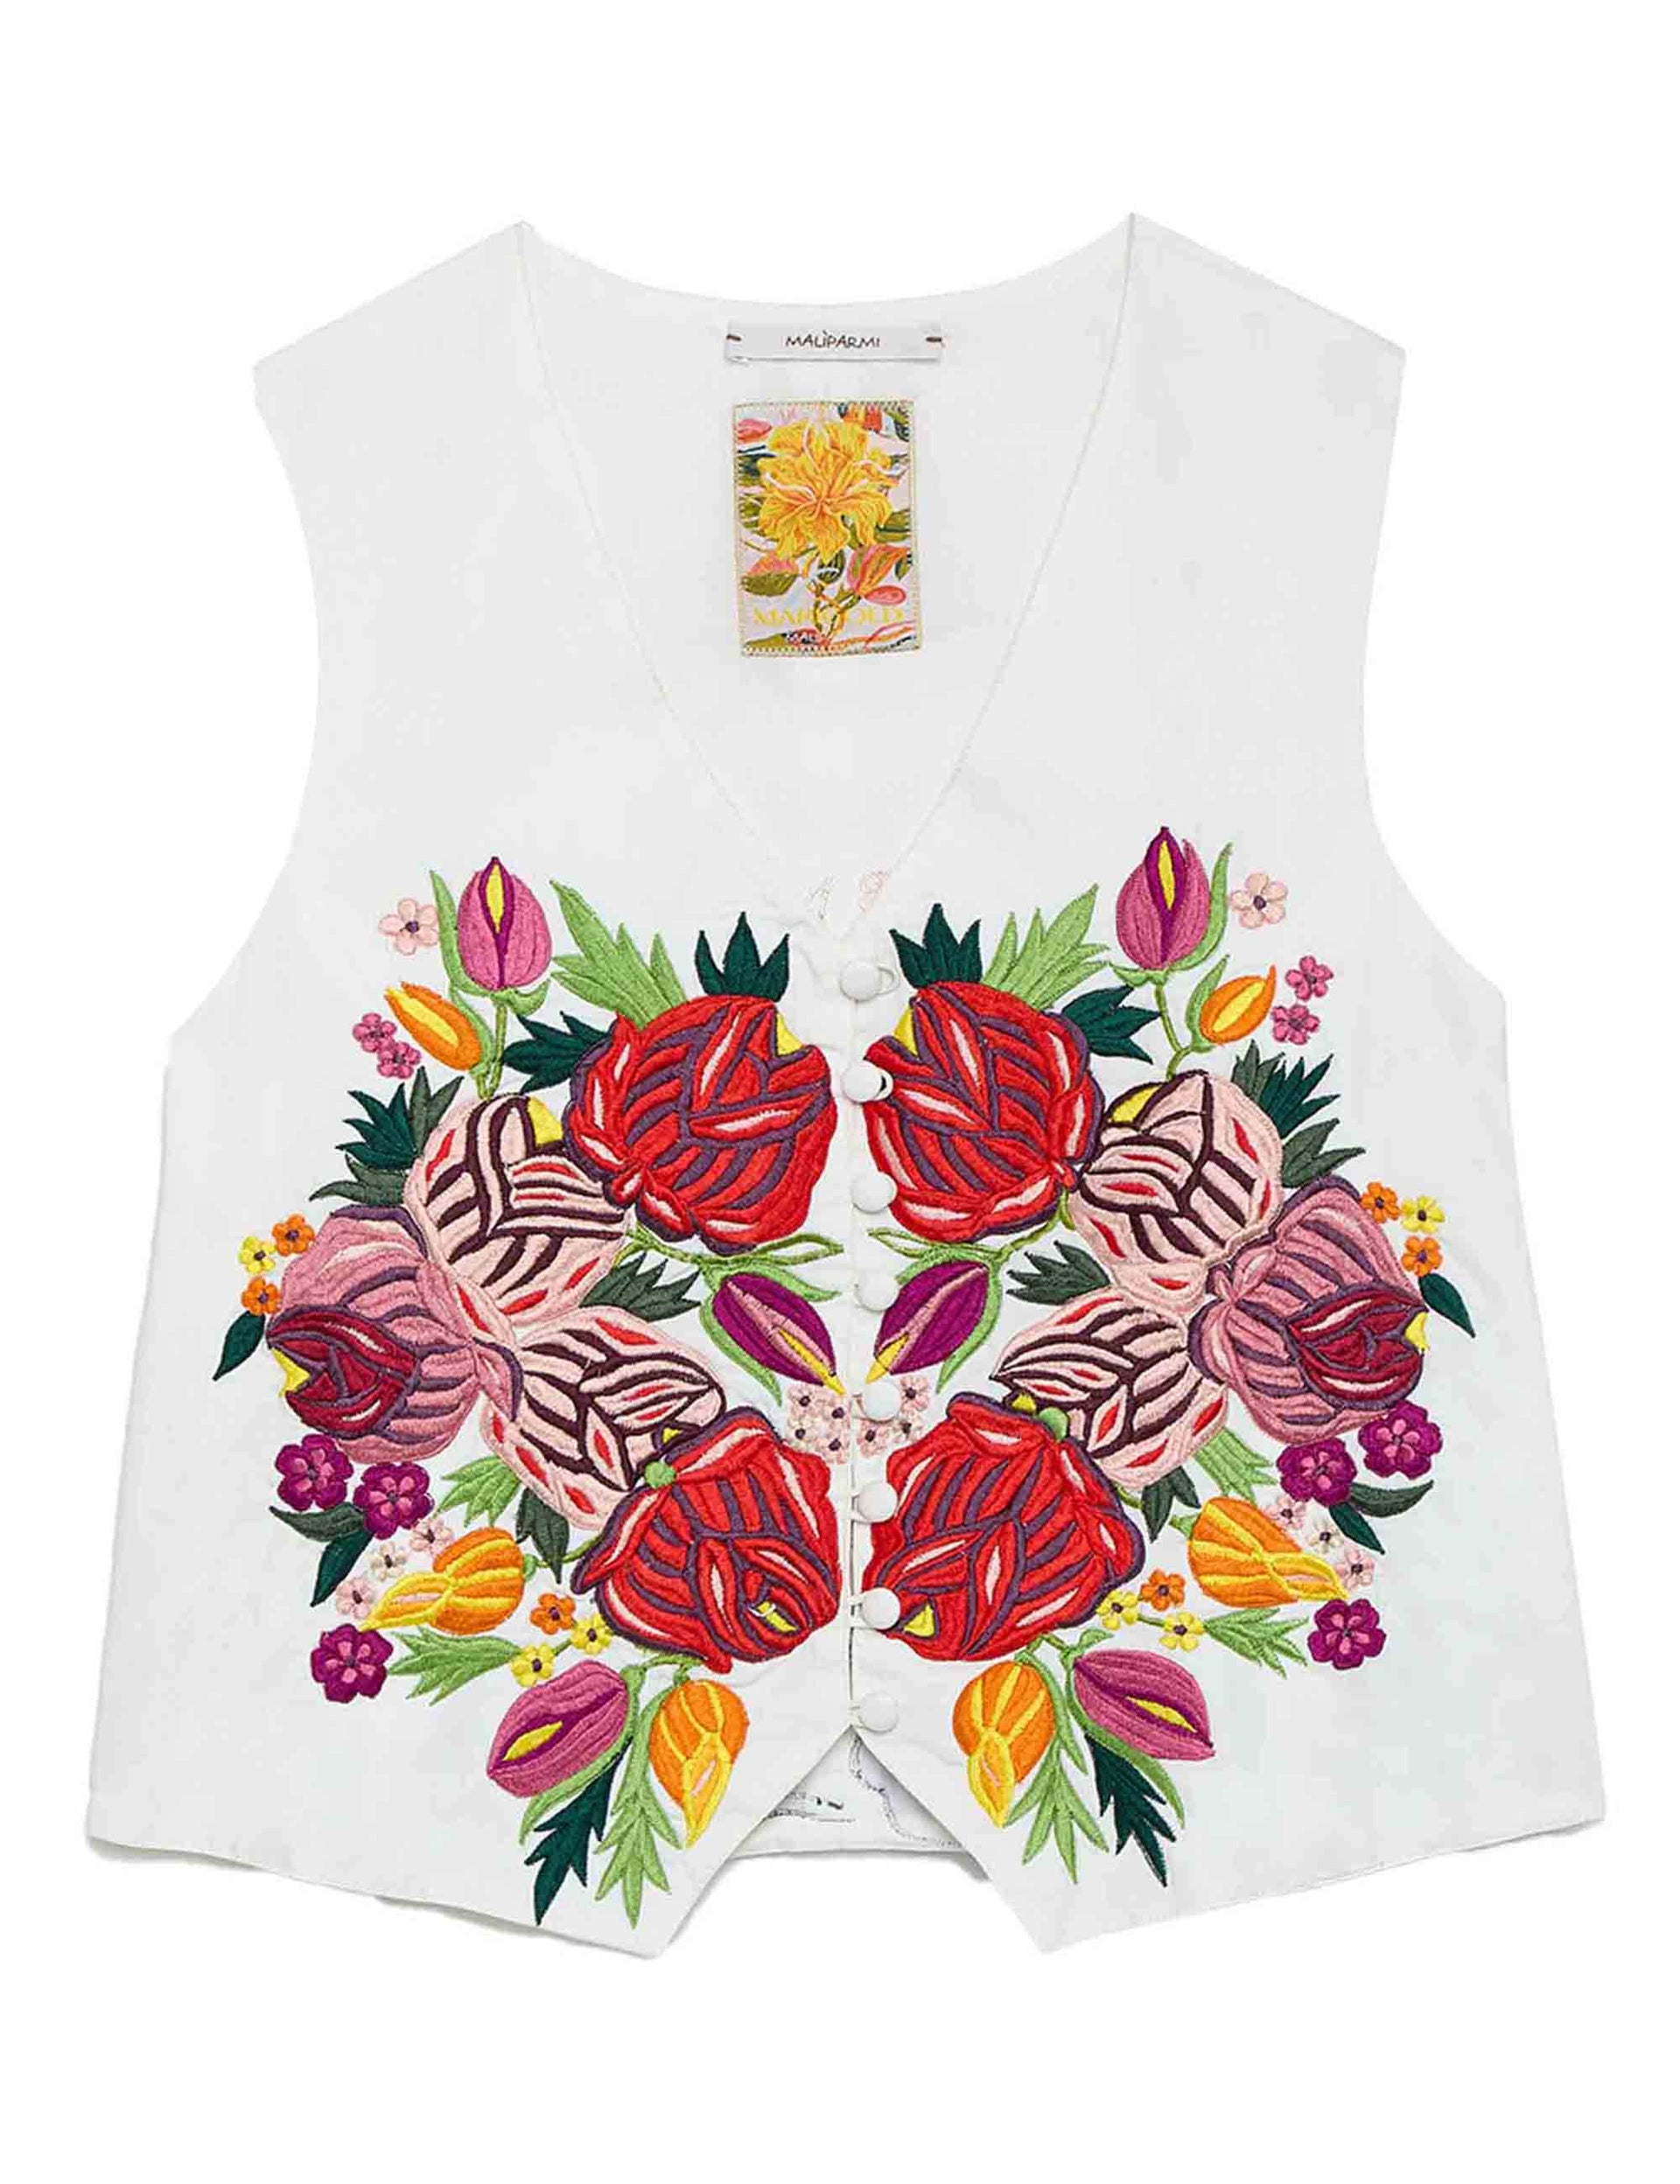 Archive Leaf Embroidery women's vest in white cotton